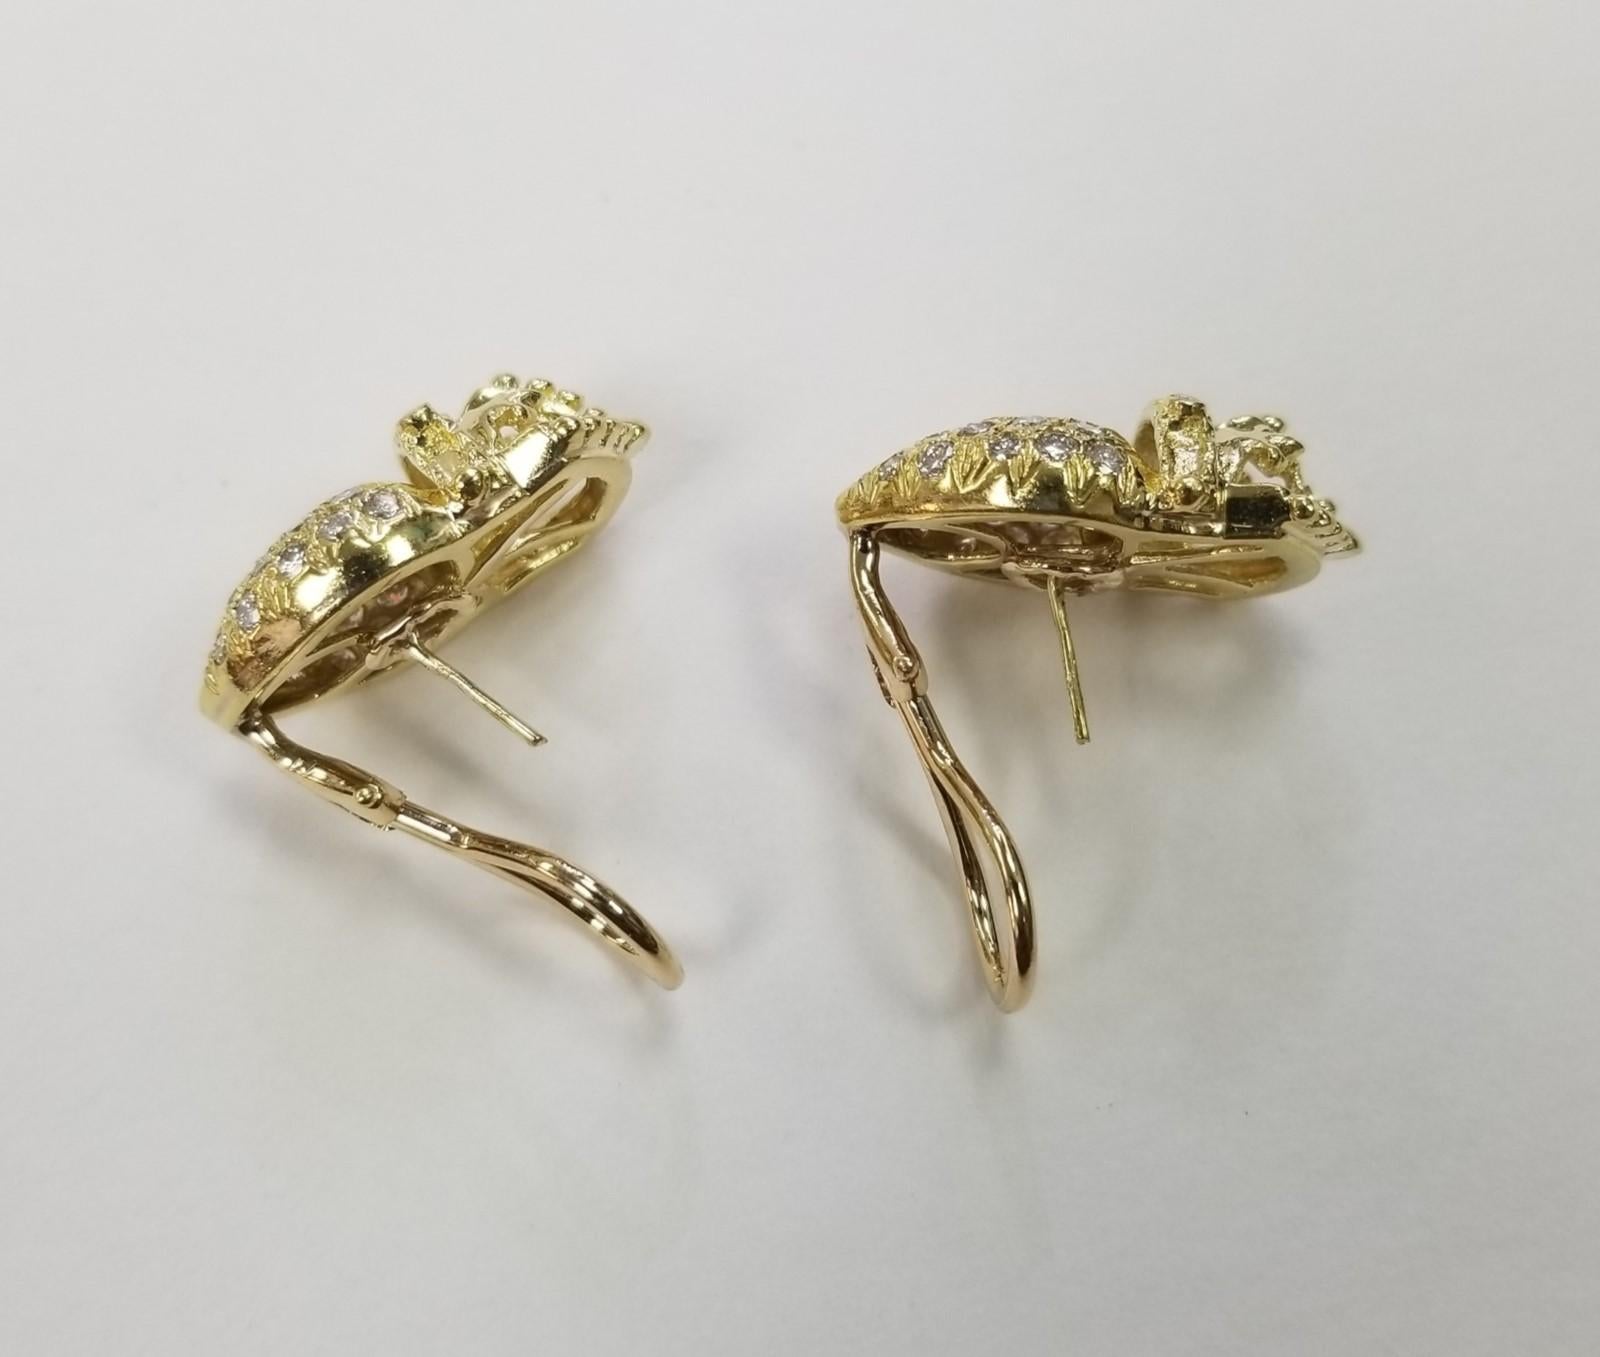 18k yellow gold crown with diamonds hearts earrings, containing 74 round full cut diamonds; color 